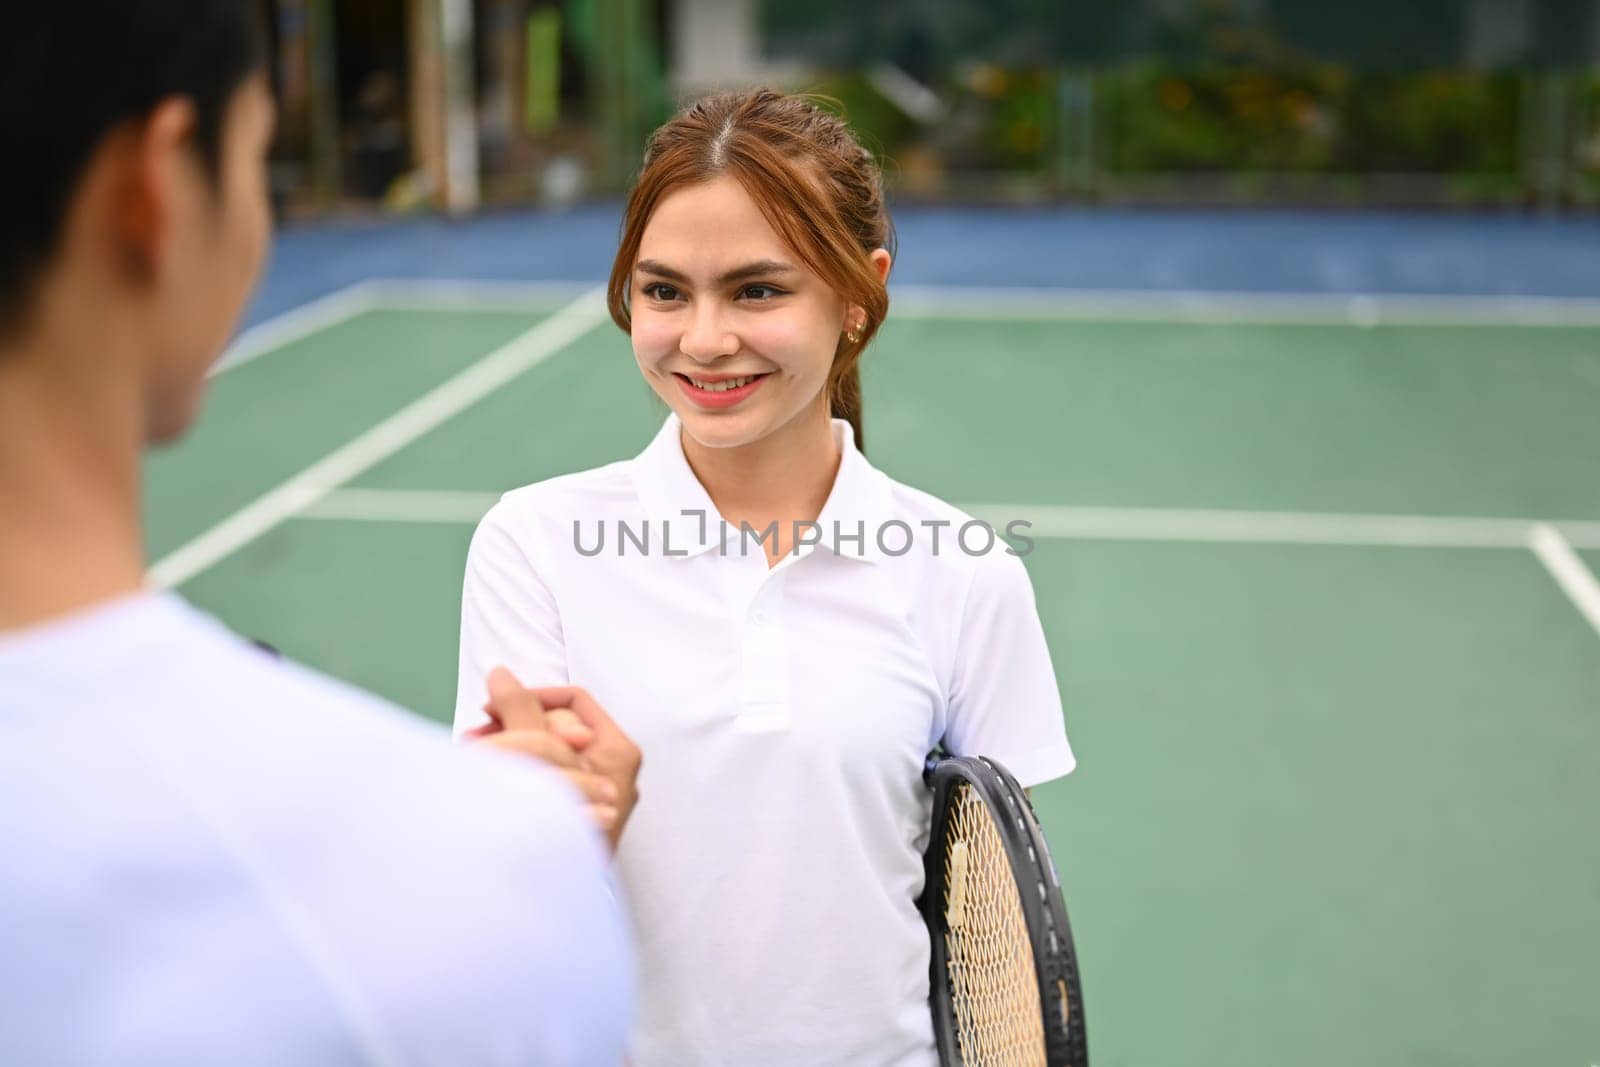 Attractive female tennis players shaking hands with competitor after a competitive match at outdoor court by prathanchorruangsak